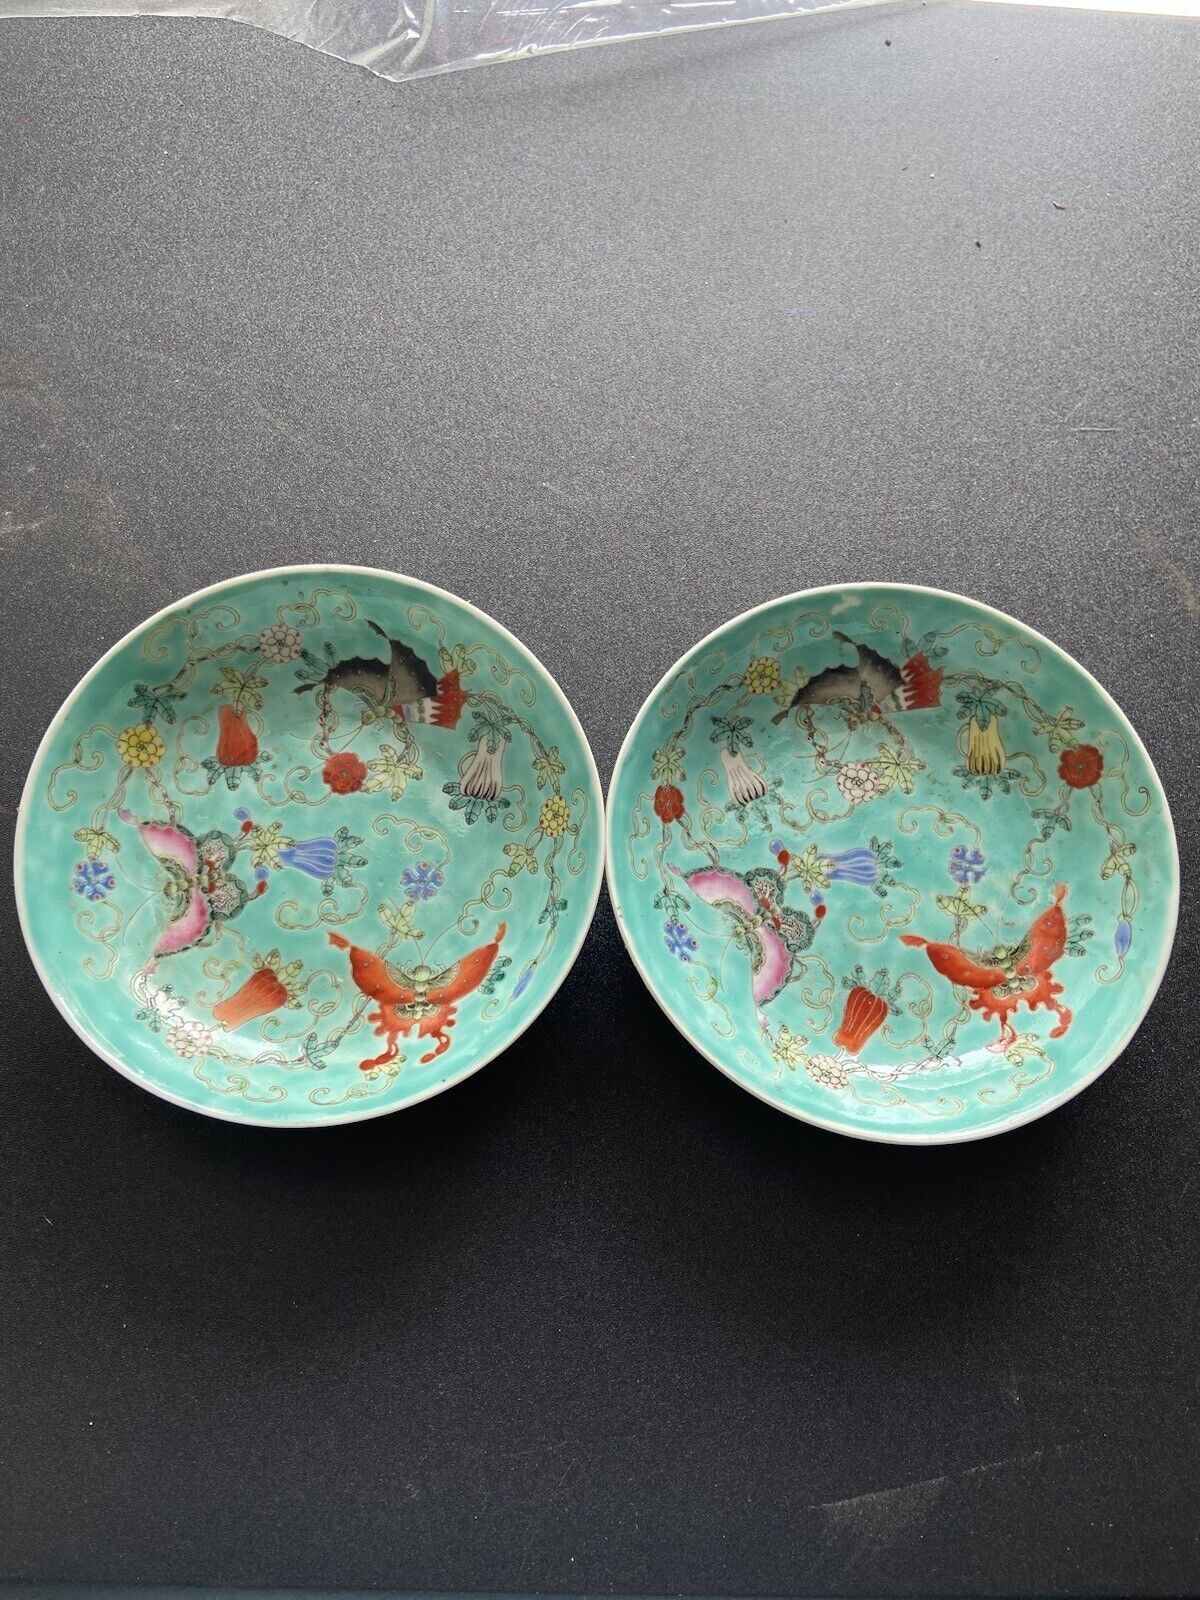 RARE ENAMELED EMPEROR GUANGXU, 1875-1905 TWO SAUCER DISHES, QING DYNASTY .